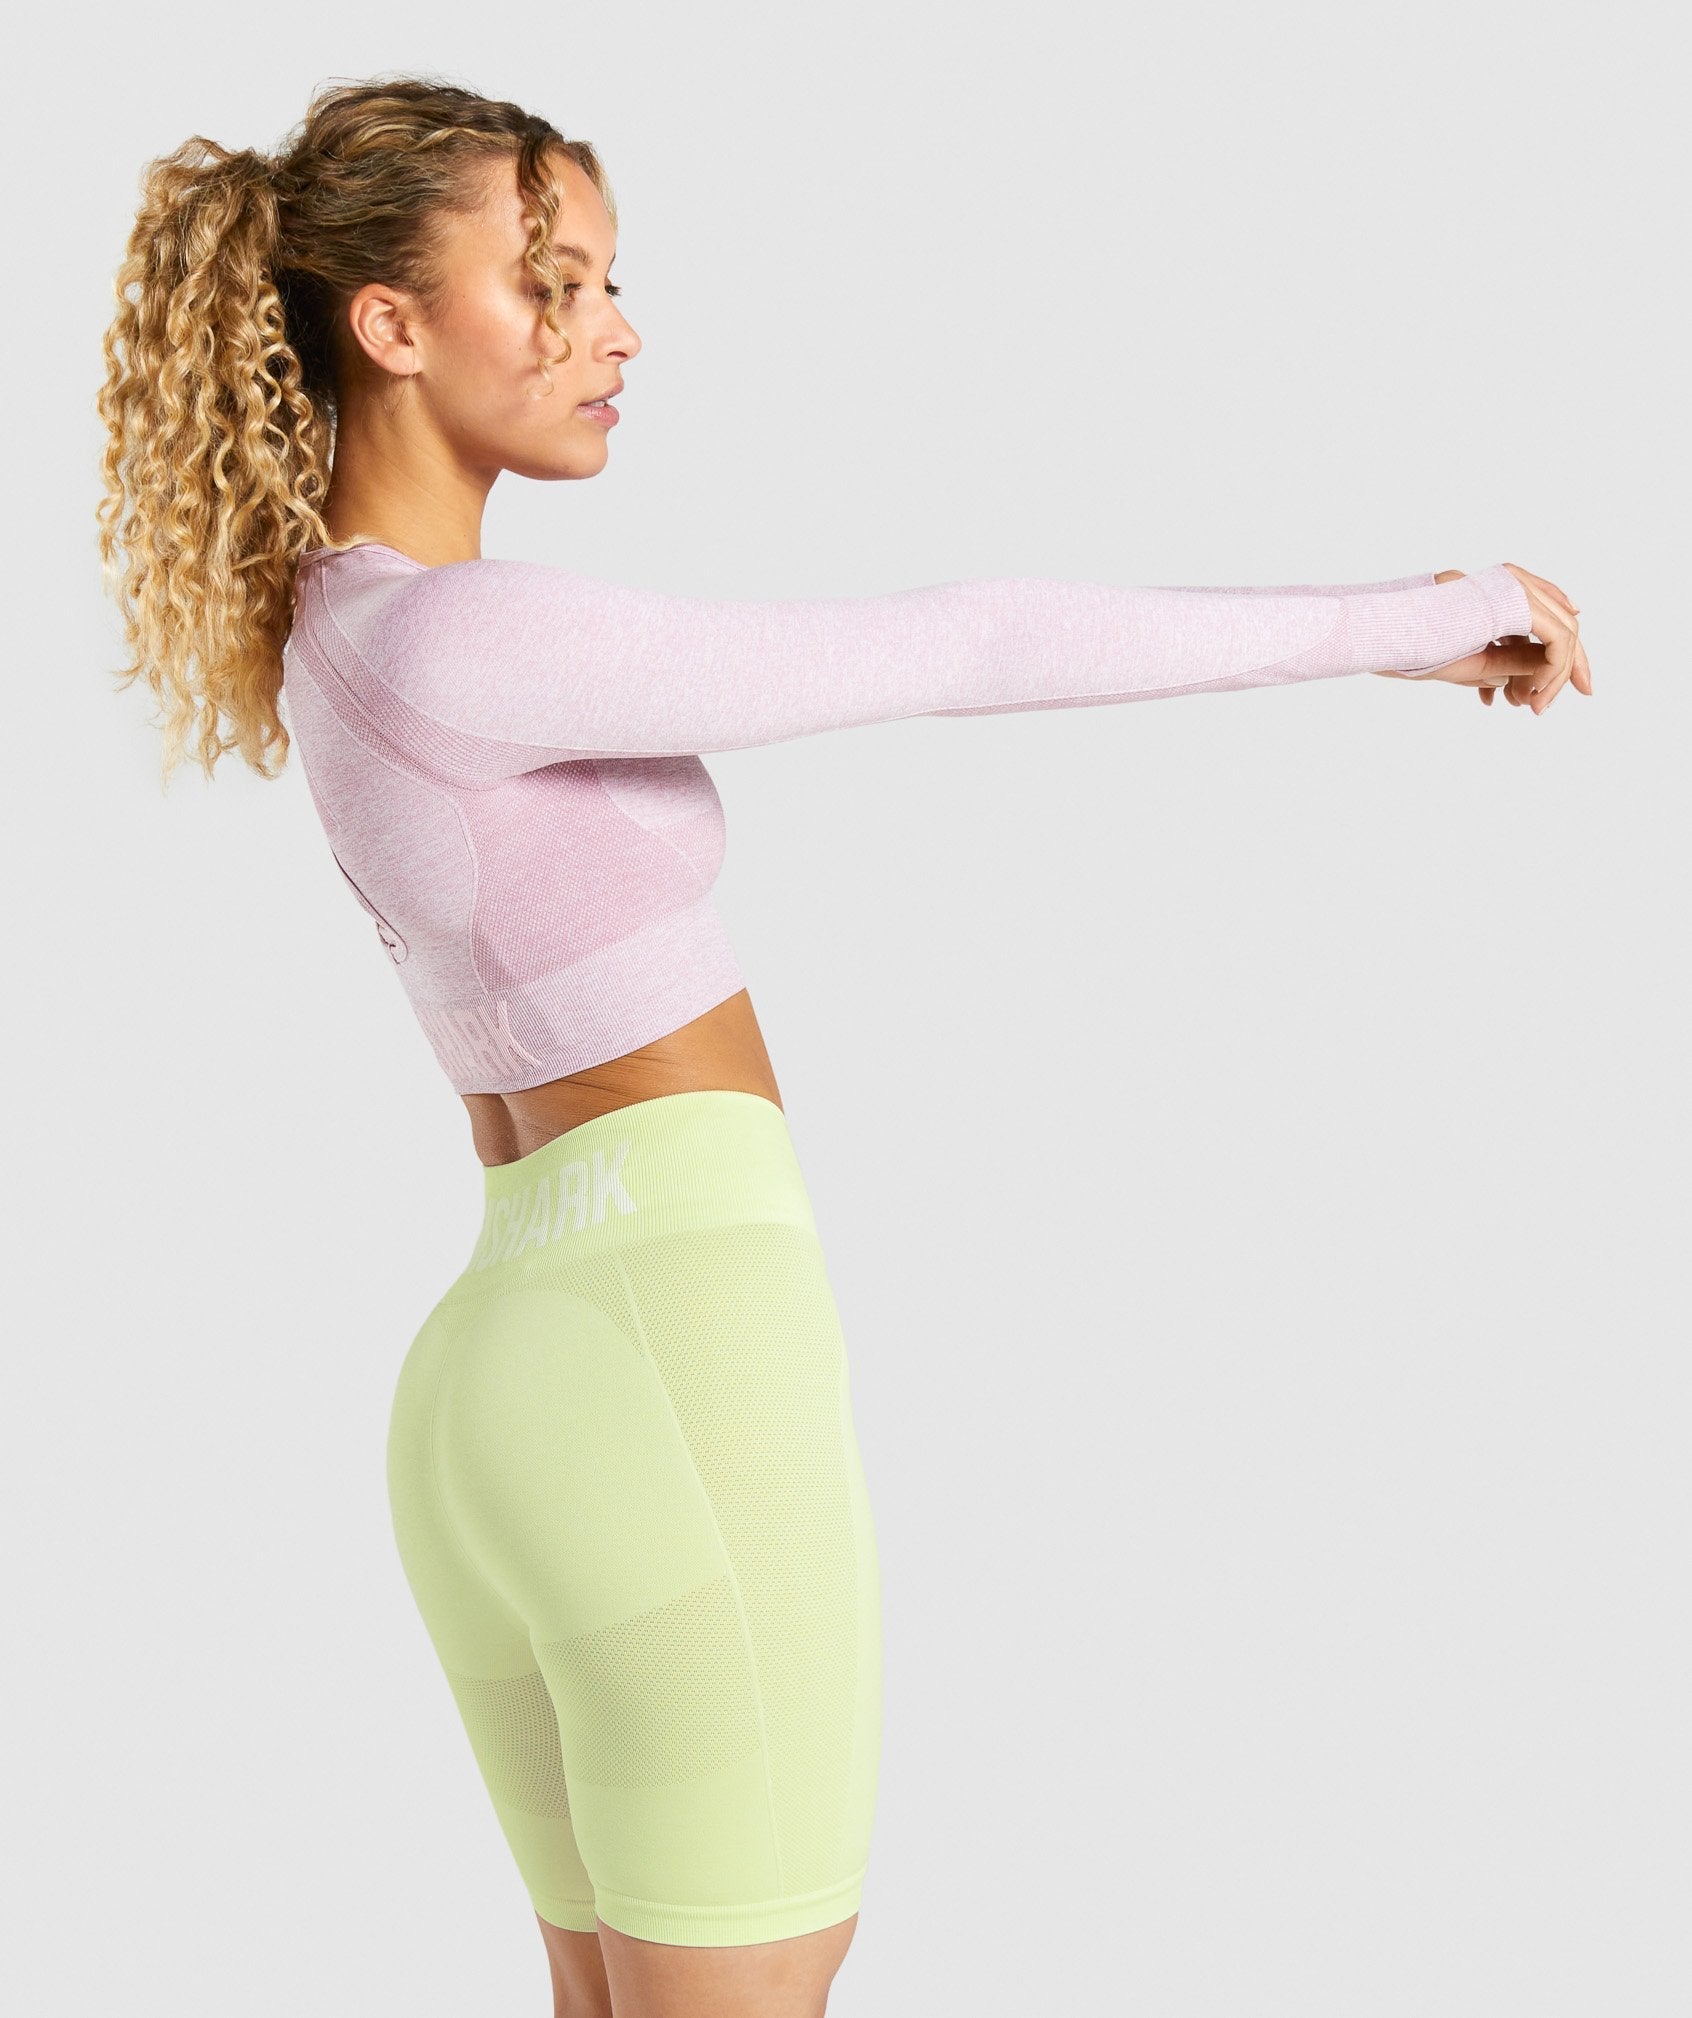 Gymshark Flex Long Sleeve Crop Top Purple Size L - $22 (45% Off Retail) -  From Francis